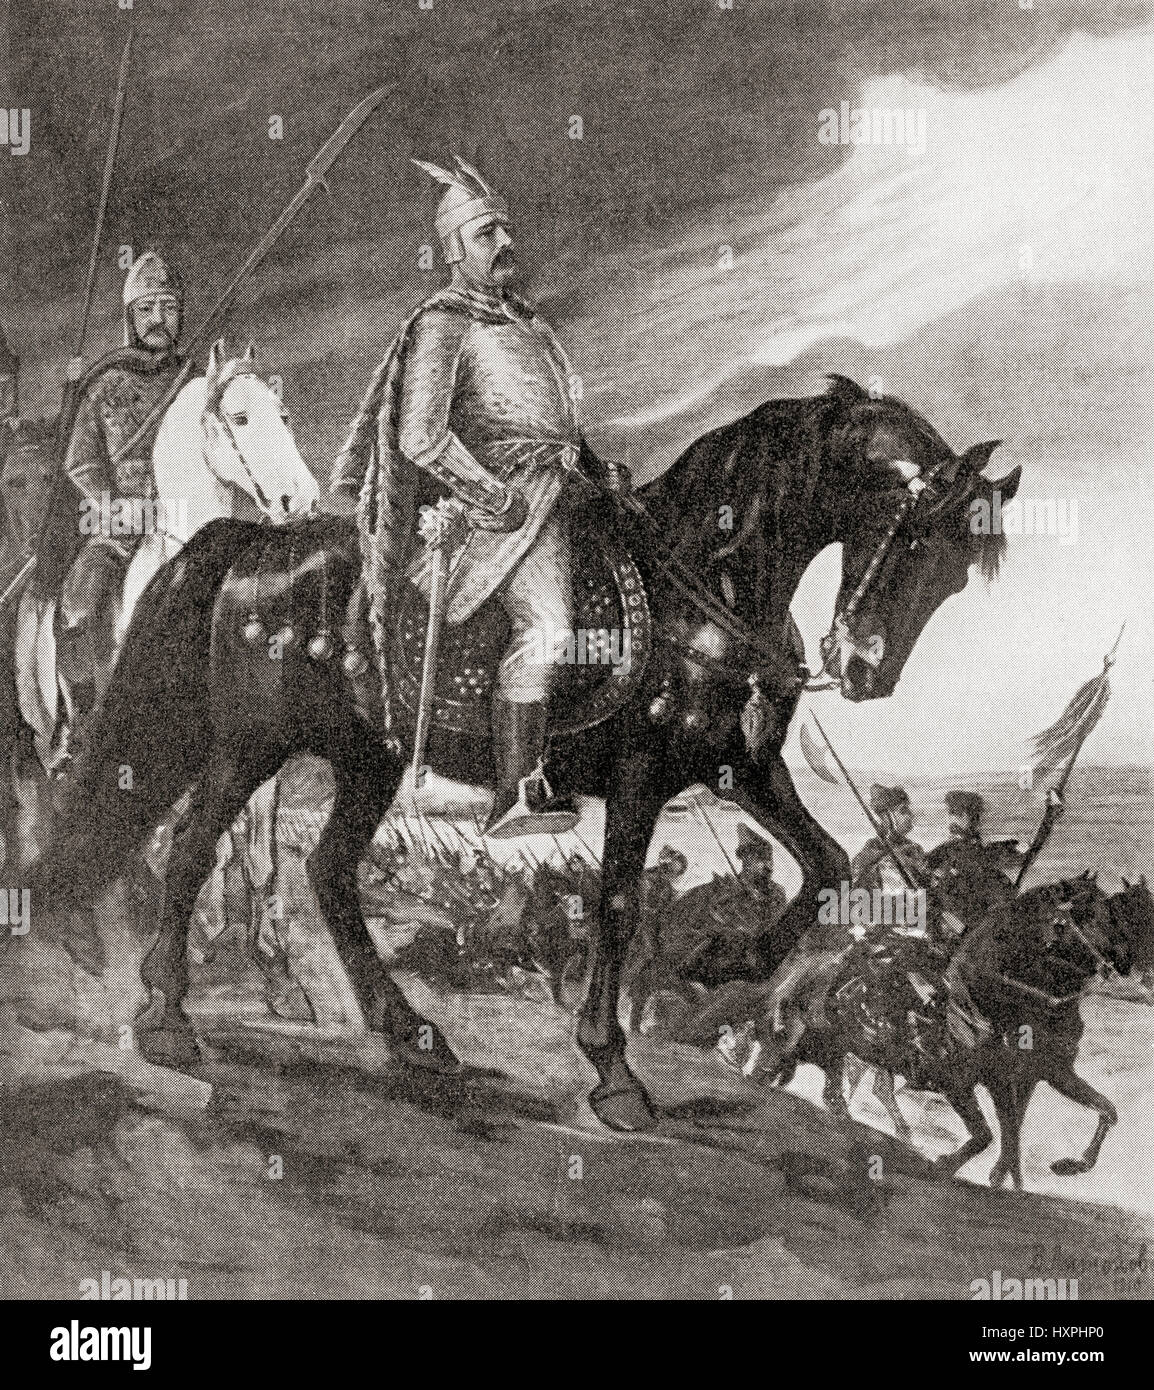 Krum, Khan of Bulgaria, from c. 803–814.  From Hutchinson's History of the Nations, published 1915. Stock Photo